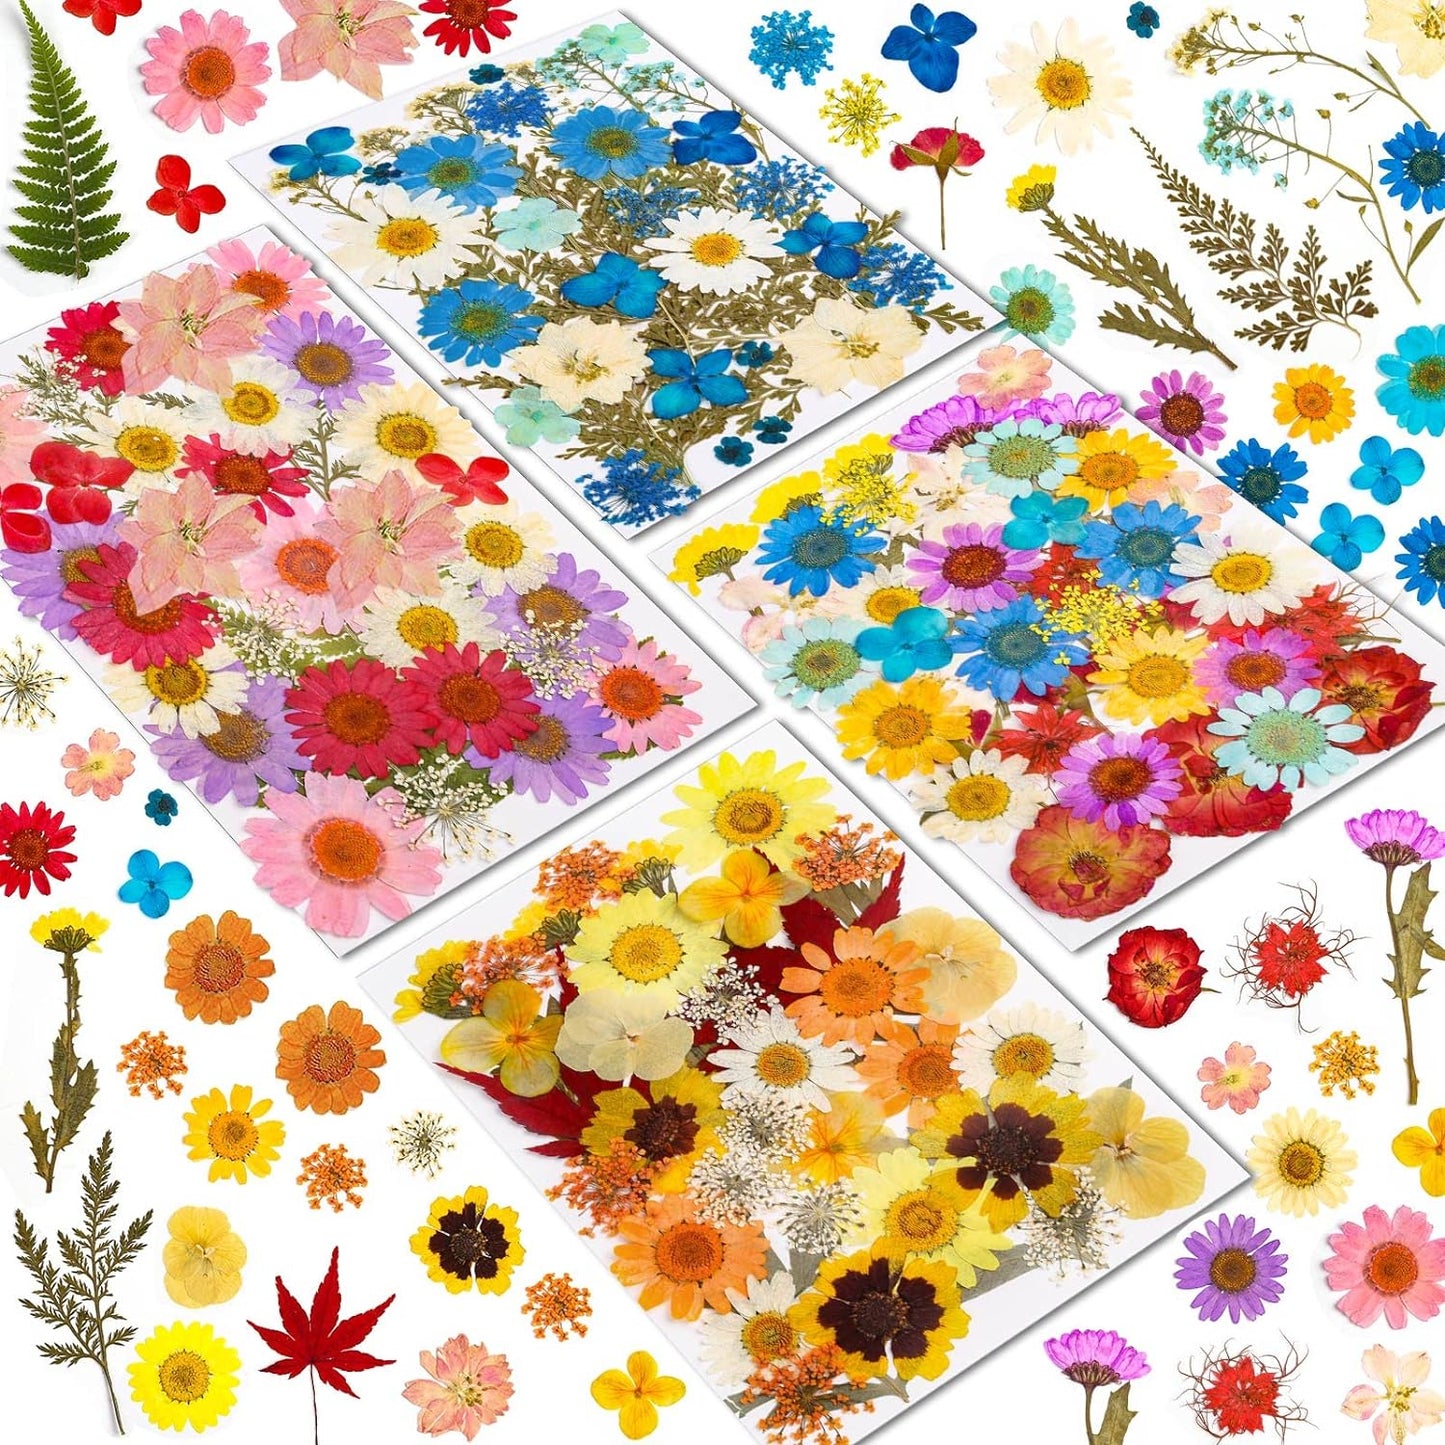 Make Your Own Pressed Flower & Resin Tray-Mother's Day Gift!